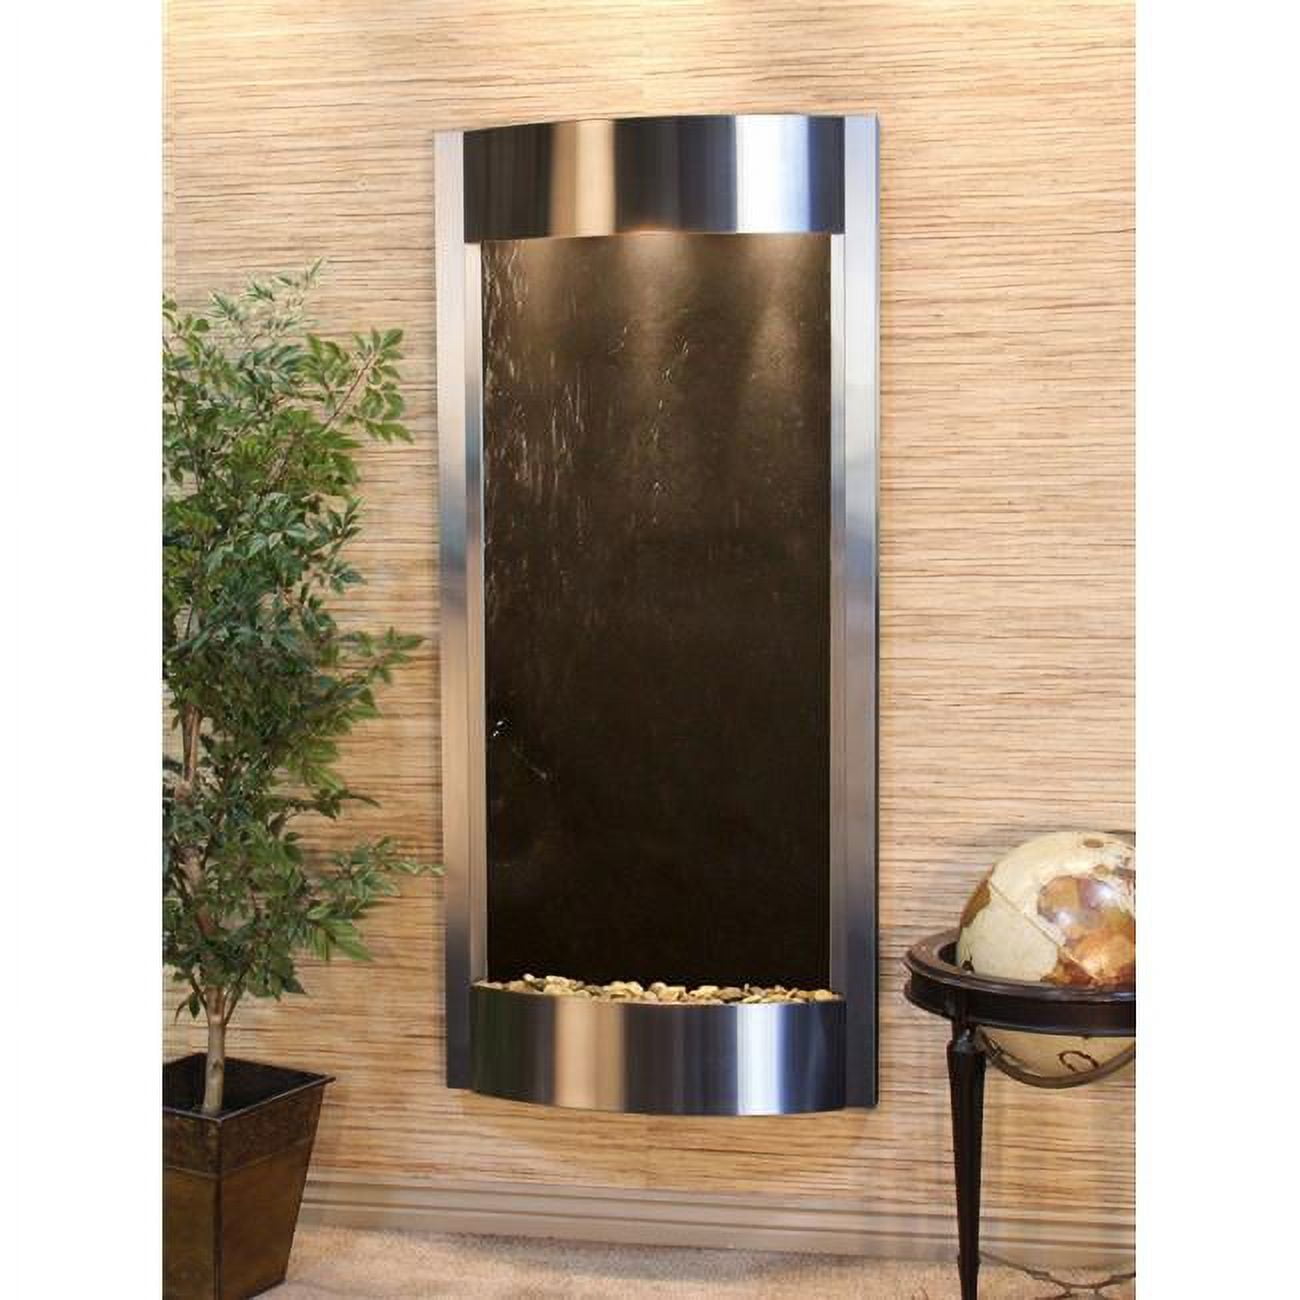 Adagio PWA2011 Pacifica Waters Stainless Steel Black Featherstone Wall Fountain